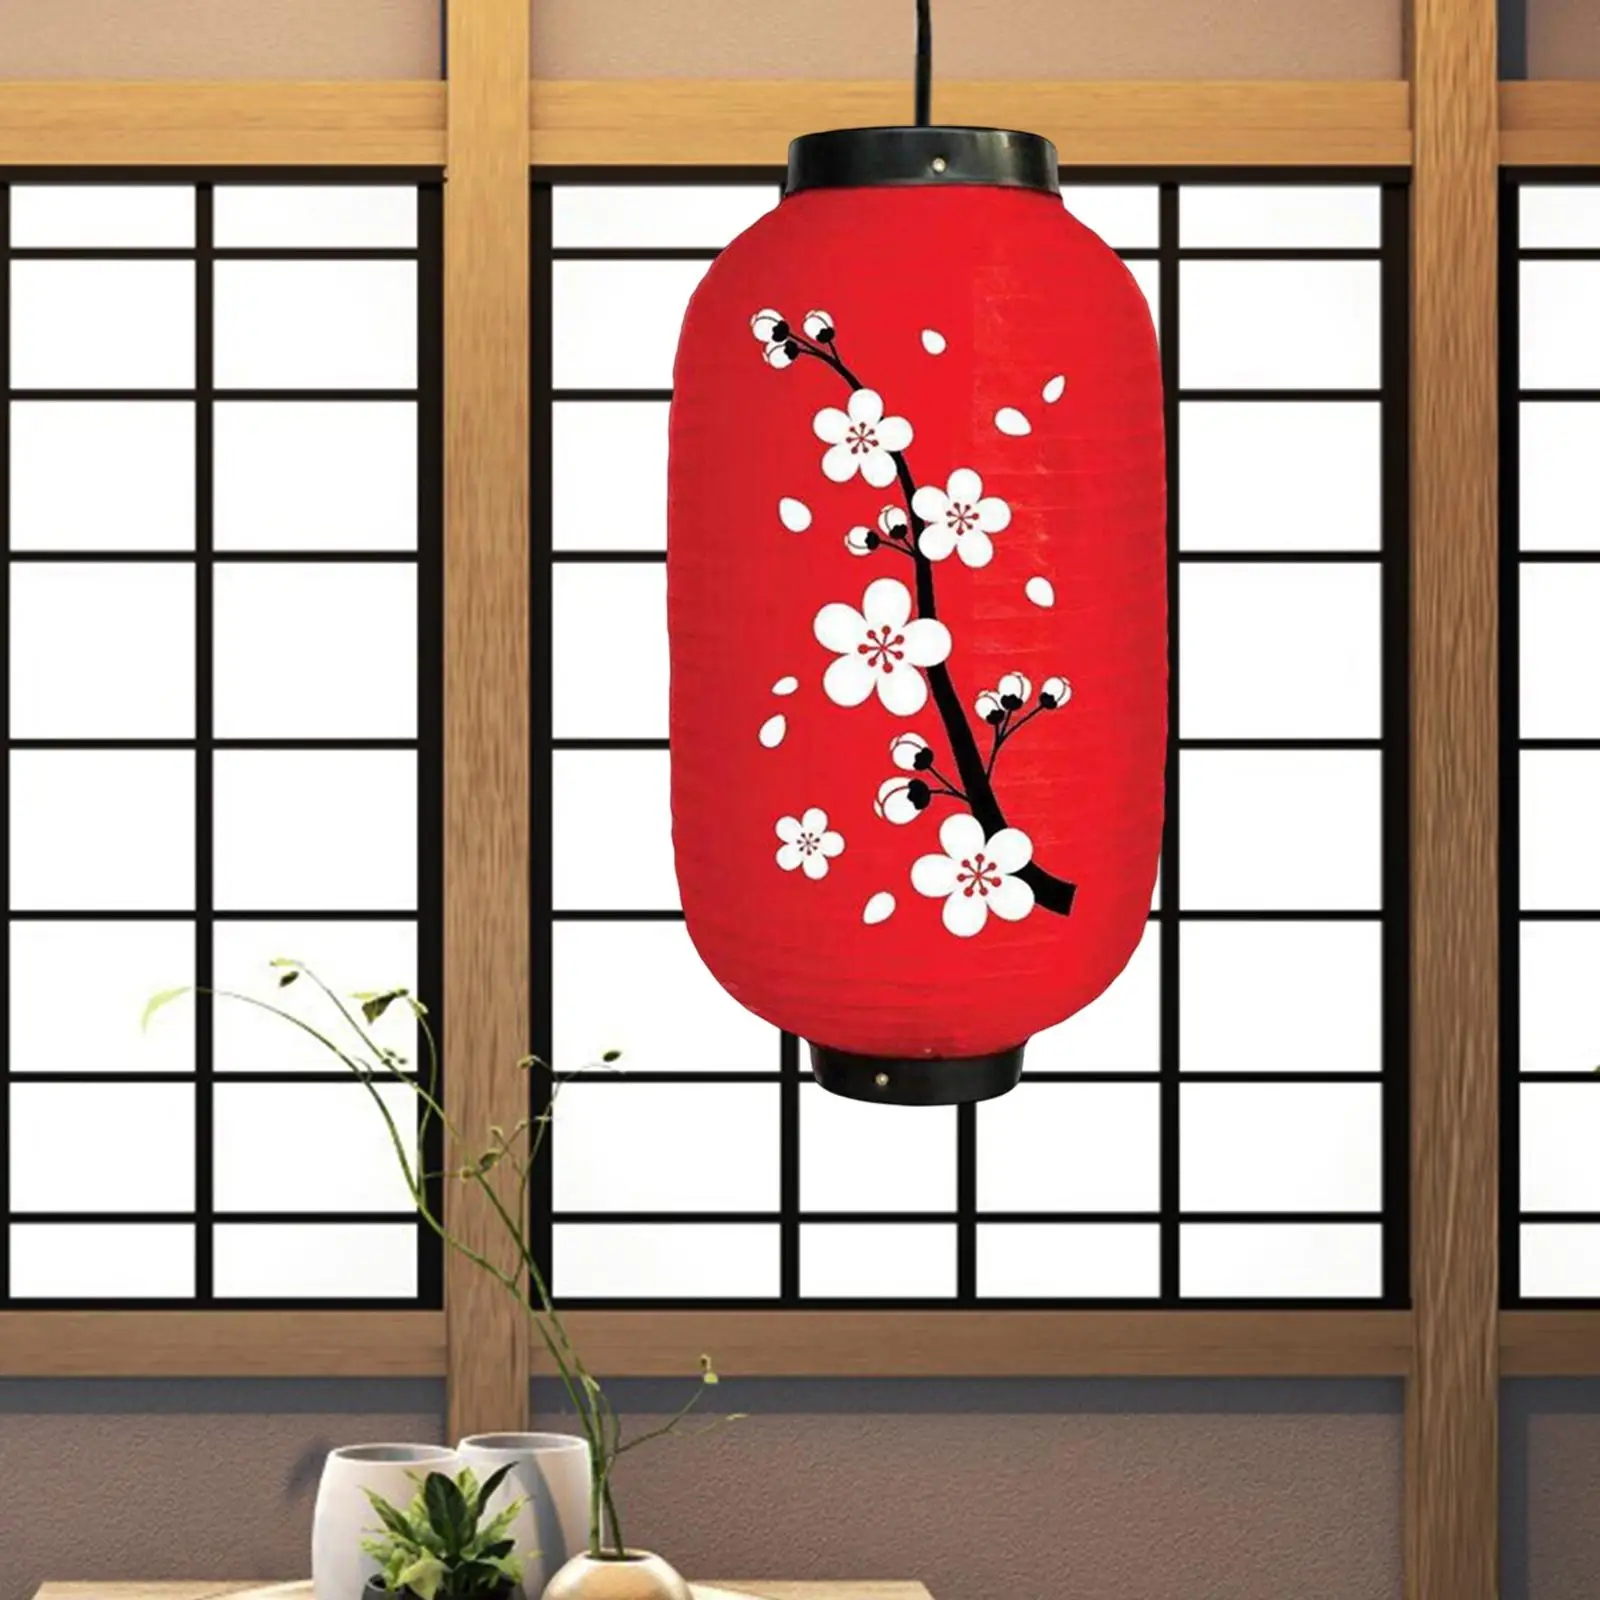 Japanese Style Lantern Lamp Shade Hanging Decorative Japanese Eateries Decor Cloth Lights for Restaurant Bar Home Birthday Party